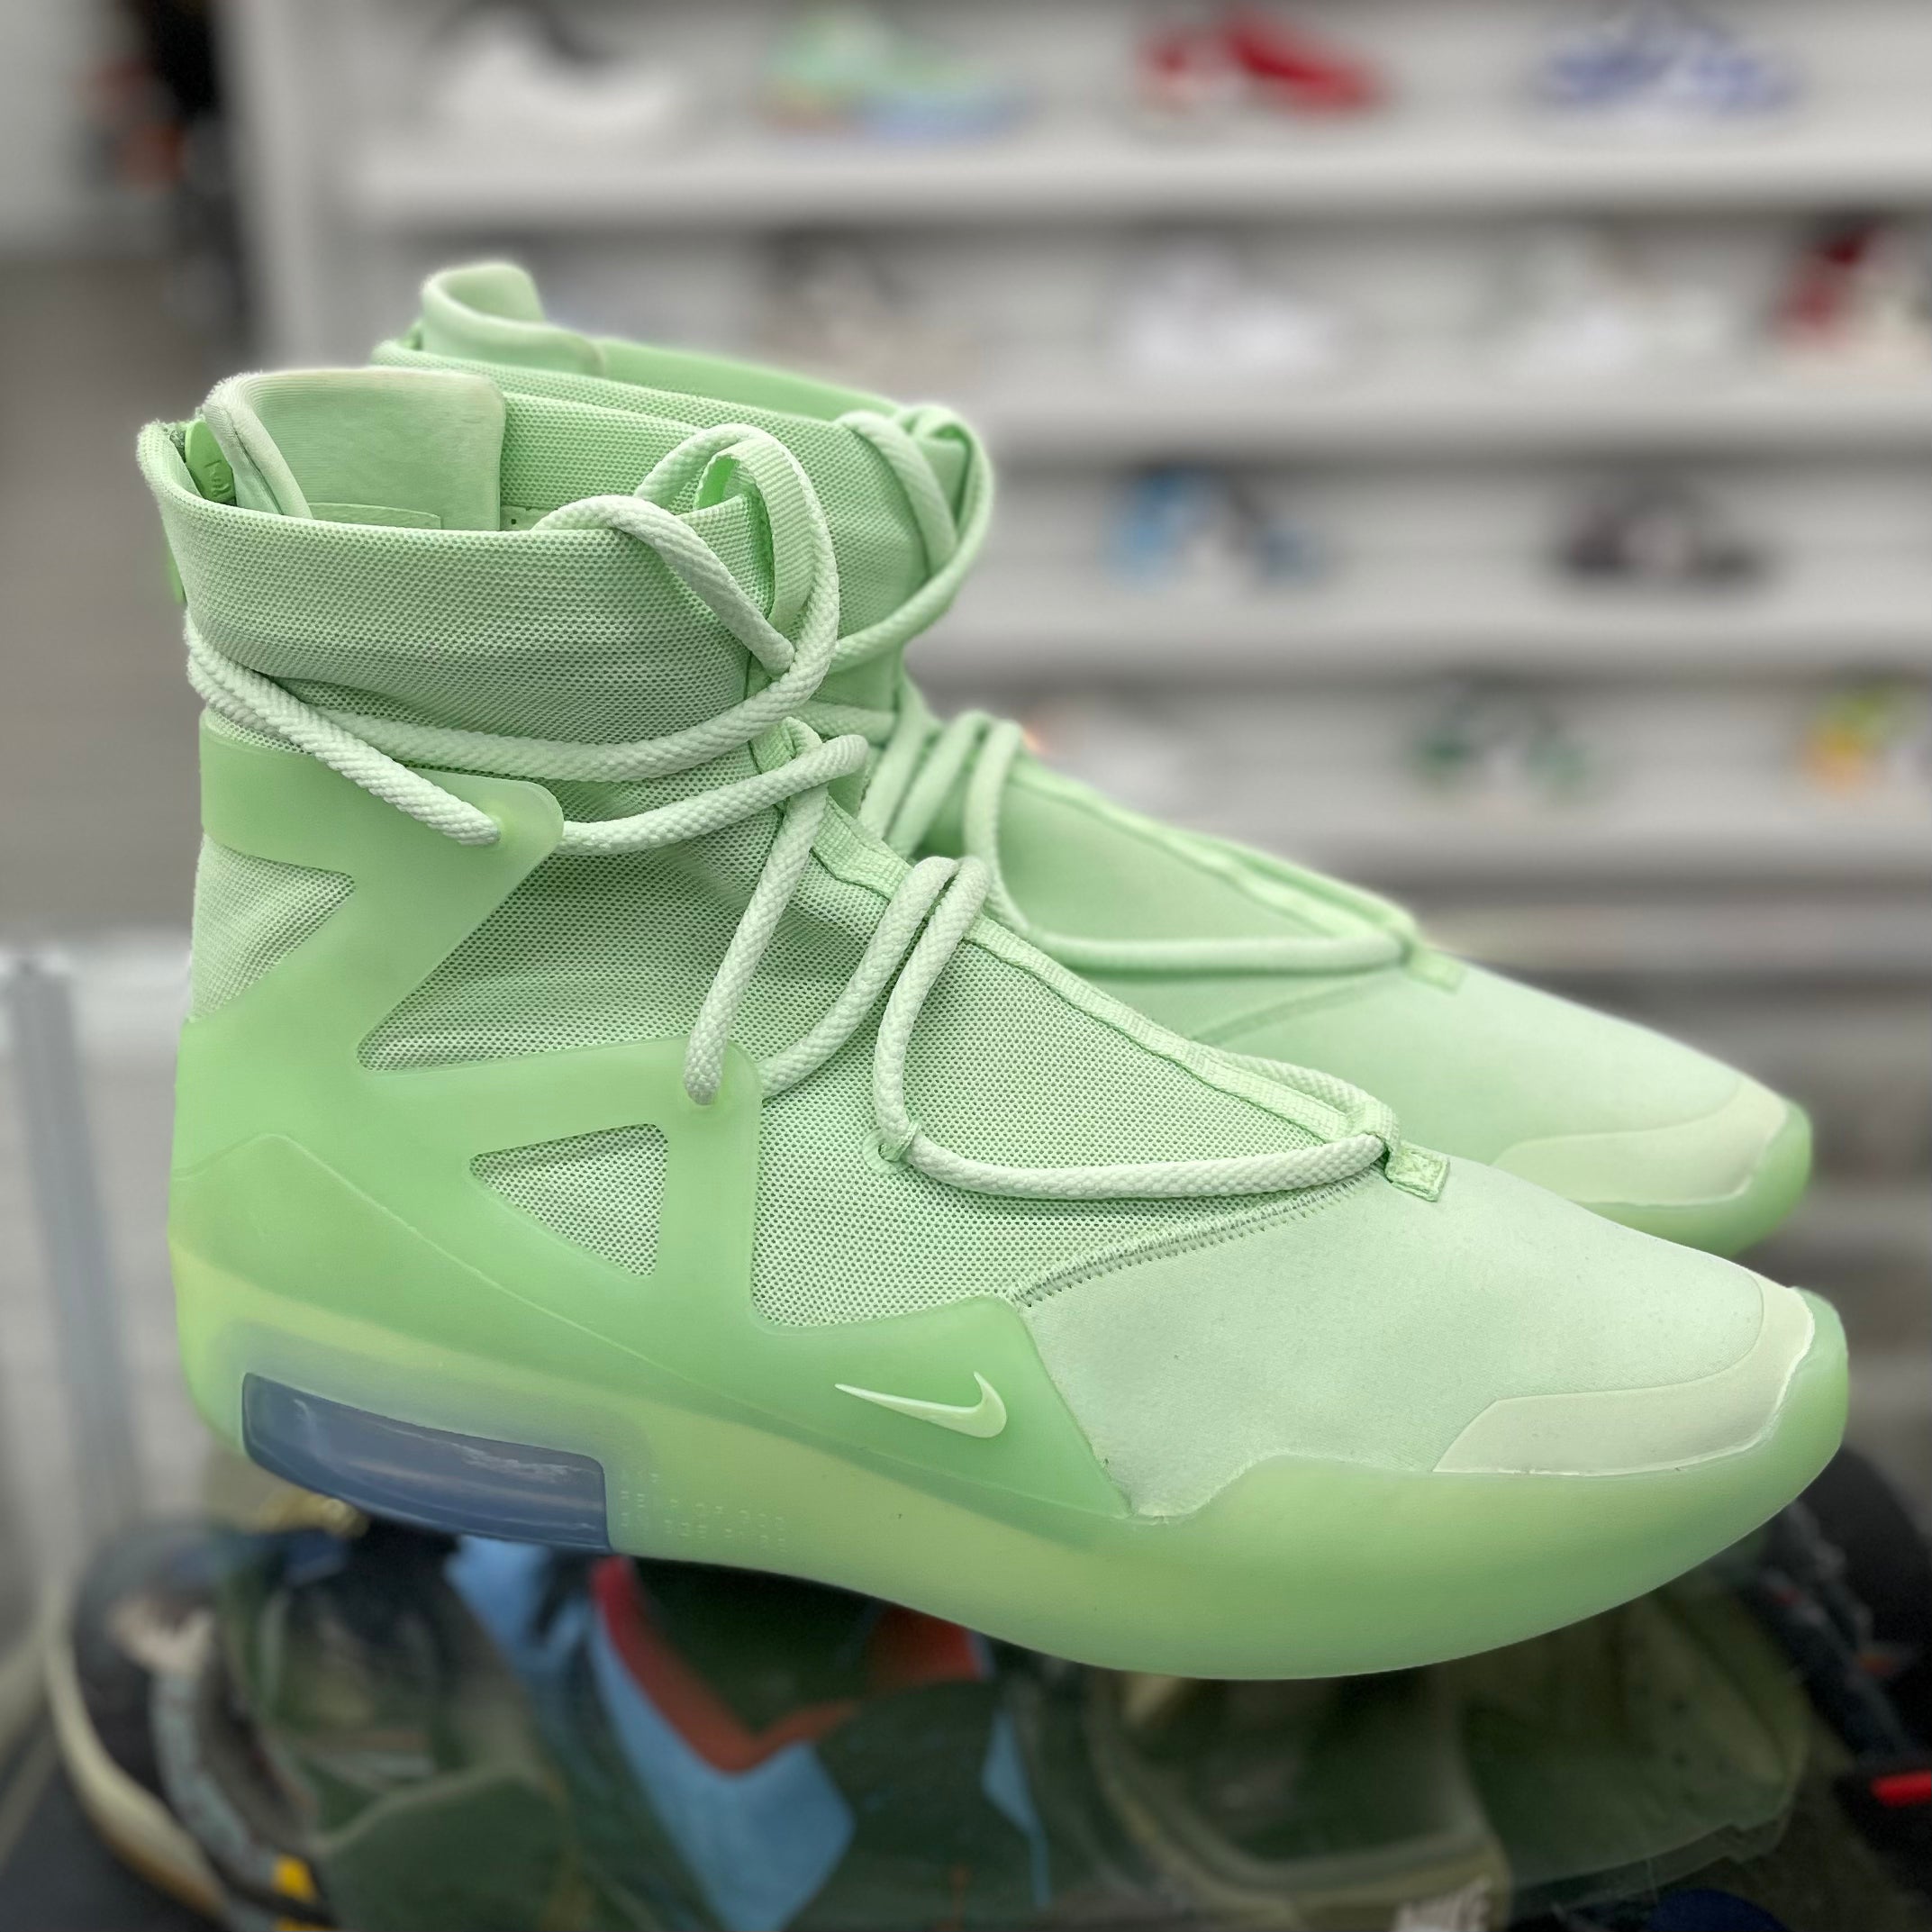 Air Fear of God 1 “Frosted Spruce”